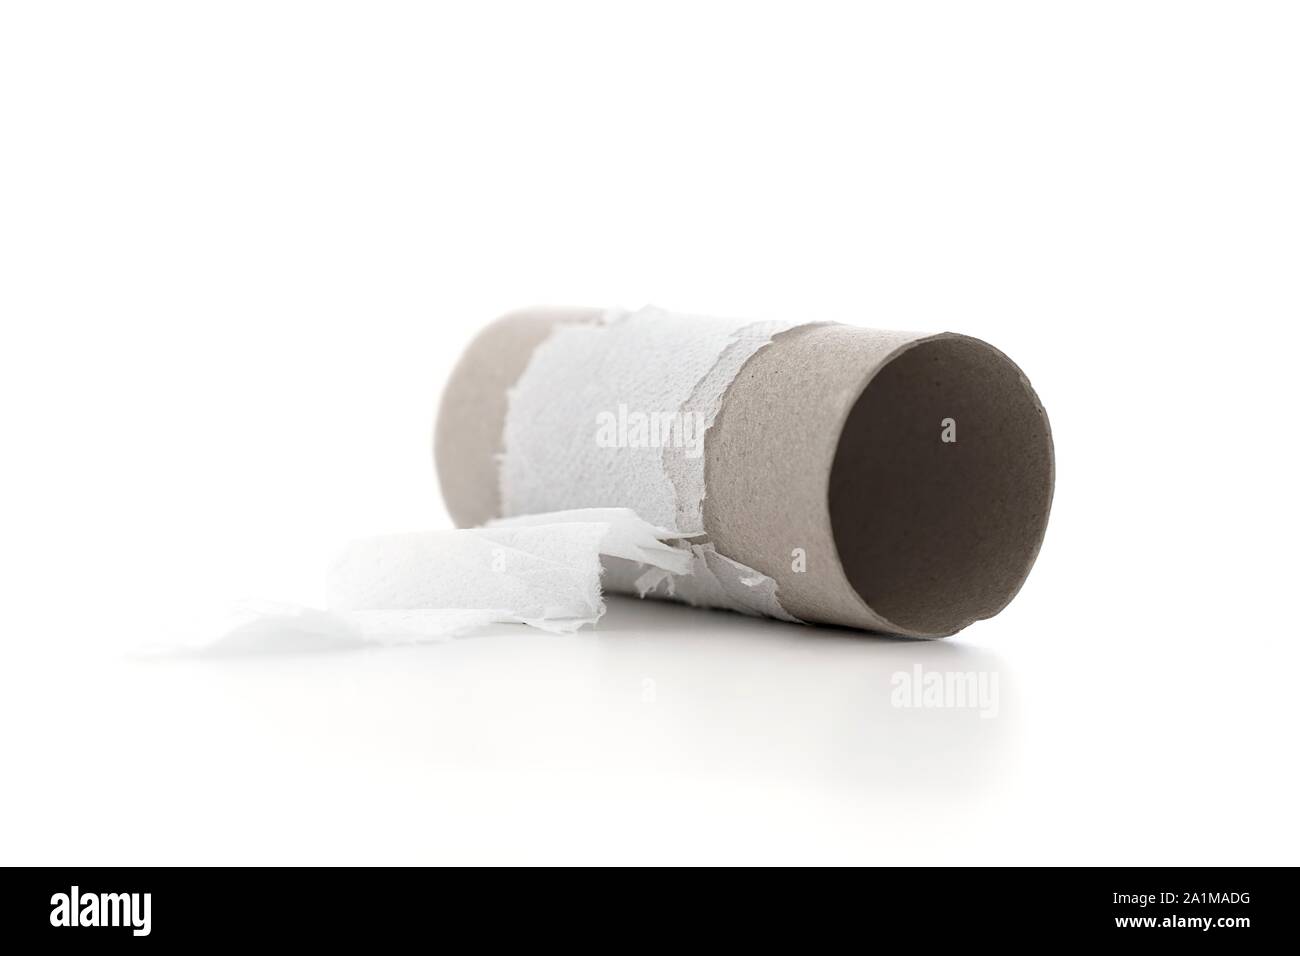 Finished toilet roll, conceptual image for diarrhoea. Stock Photo